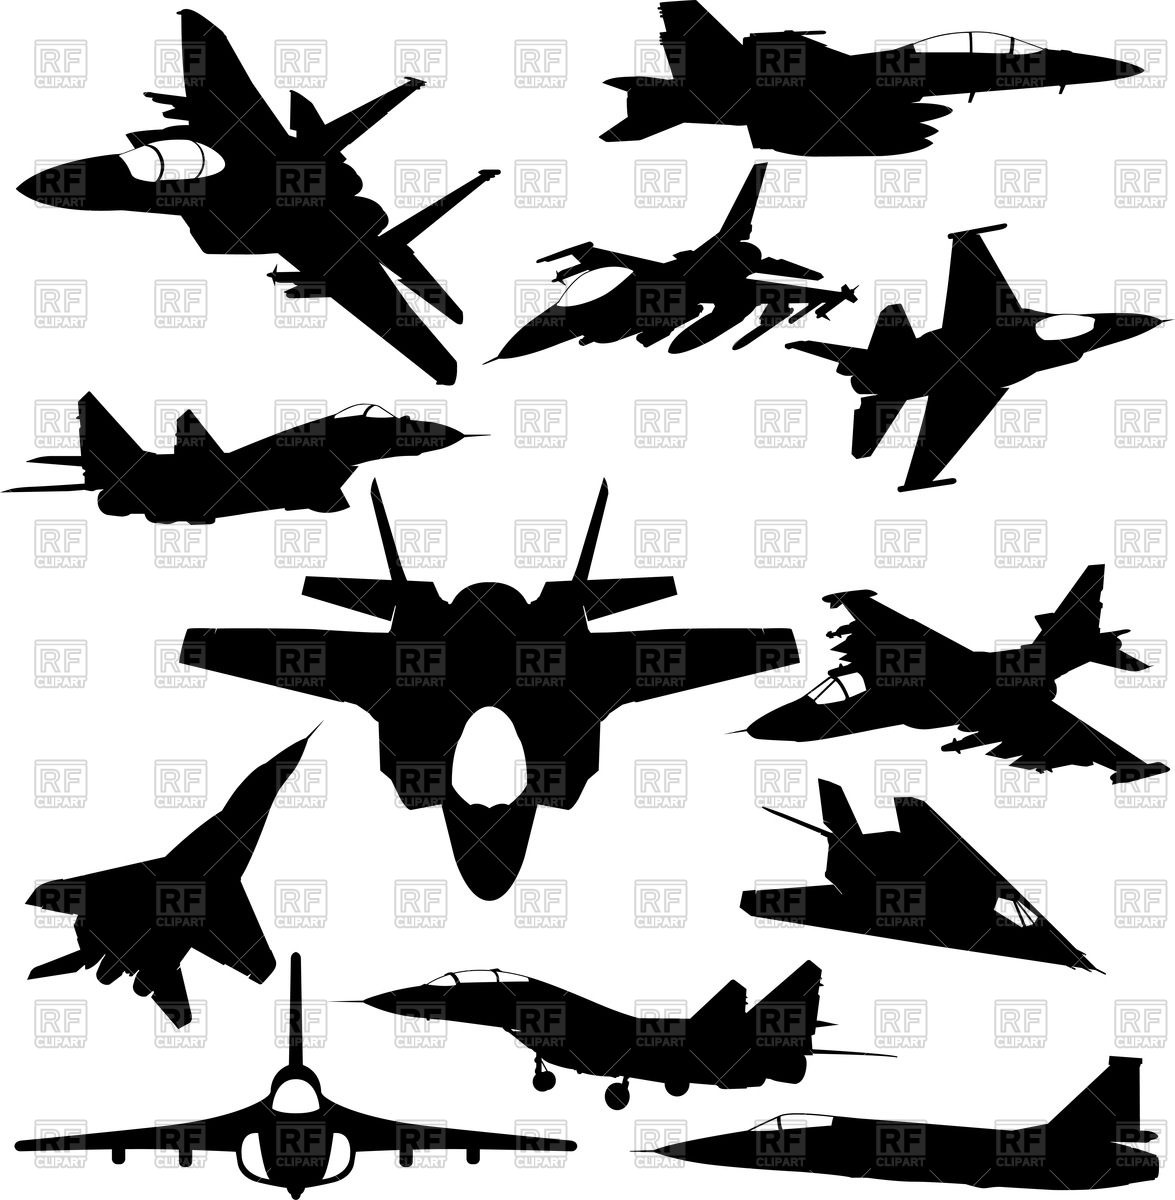 Military Jet Fighter Silhouettes Download Royalty Free Vector Clipart